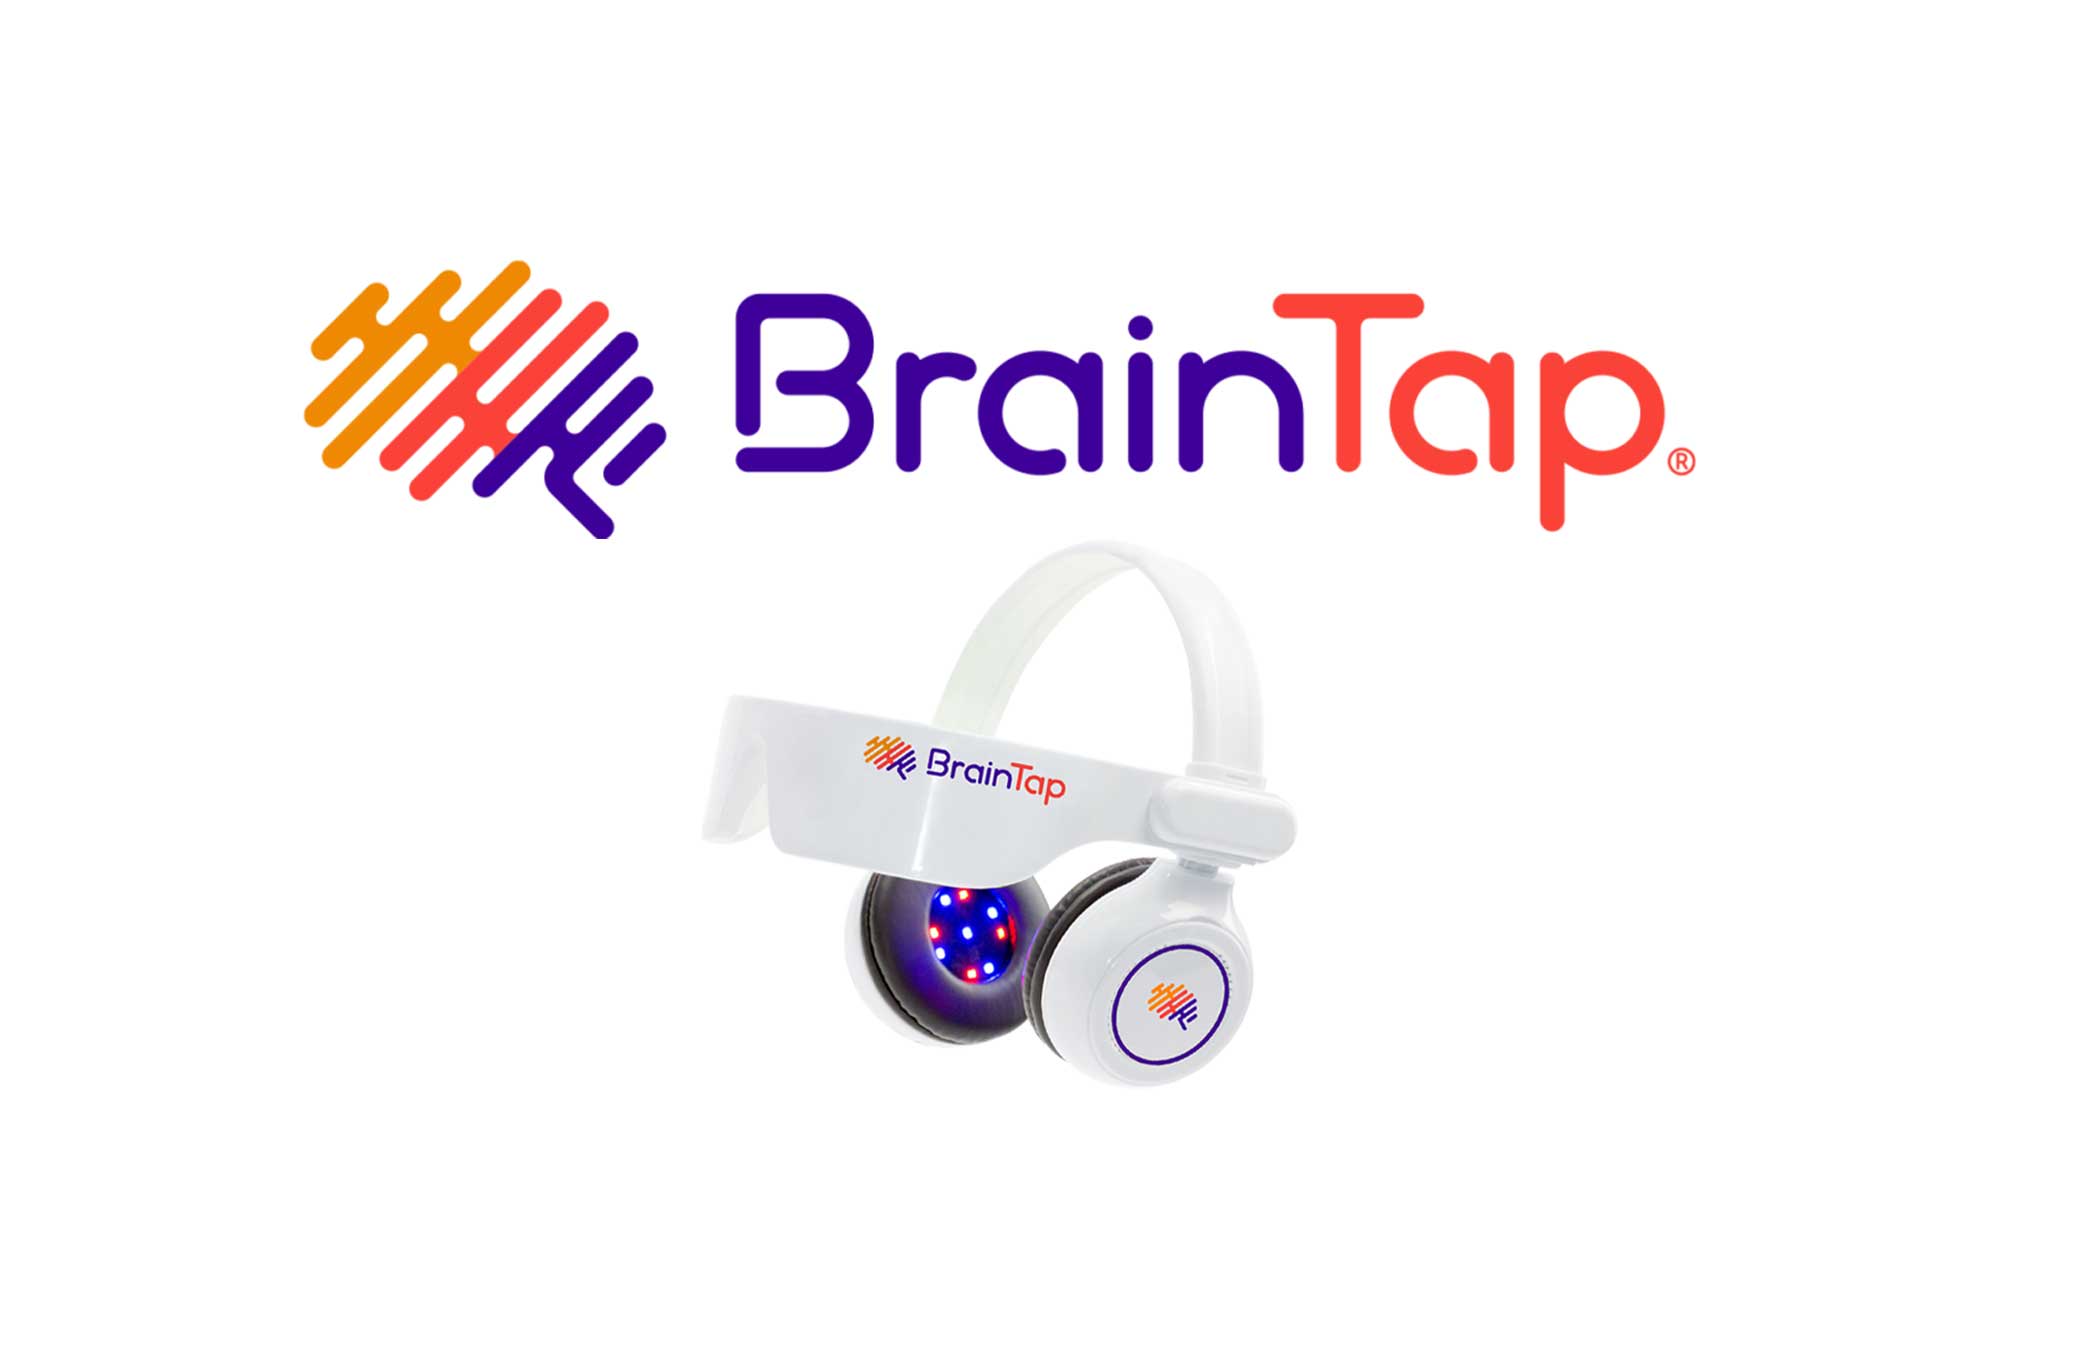 The image shows the Braintap logo depicting a brain made out of diagonal lines colored from orange to red and then purple, followed by the text "Brain Tap" in red and purple. Under the text is an image of a braintap headset in white.